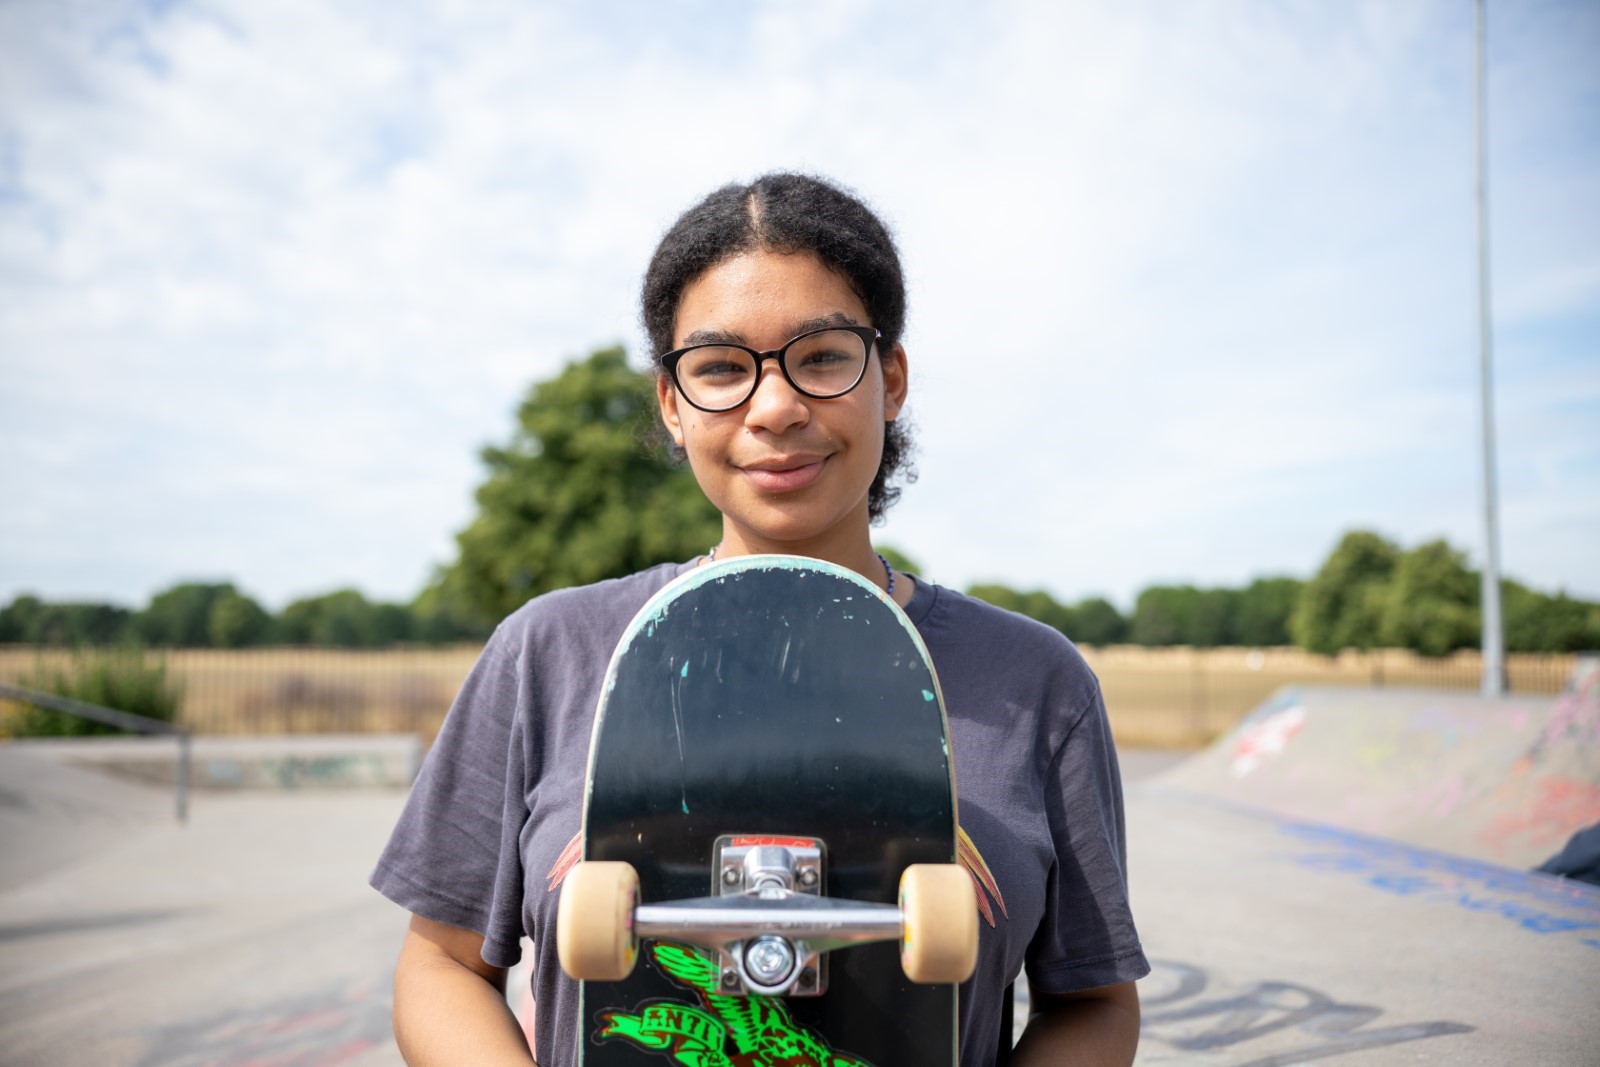 Image shows young girl in glasses holding her skateboard looking at the camera